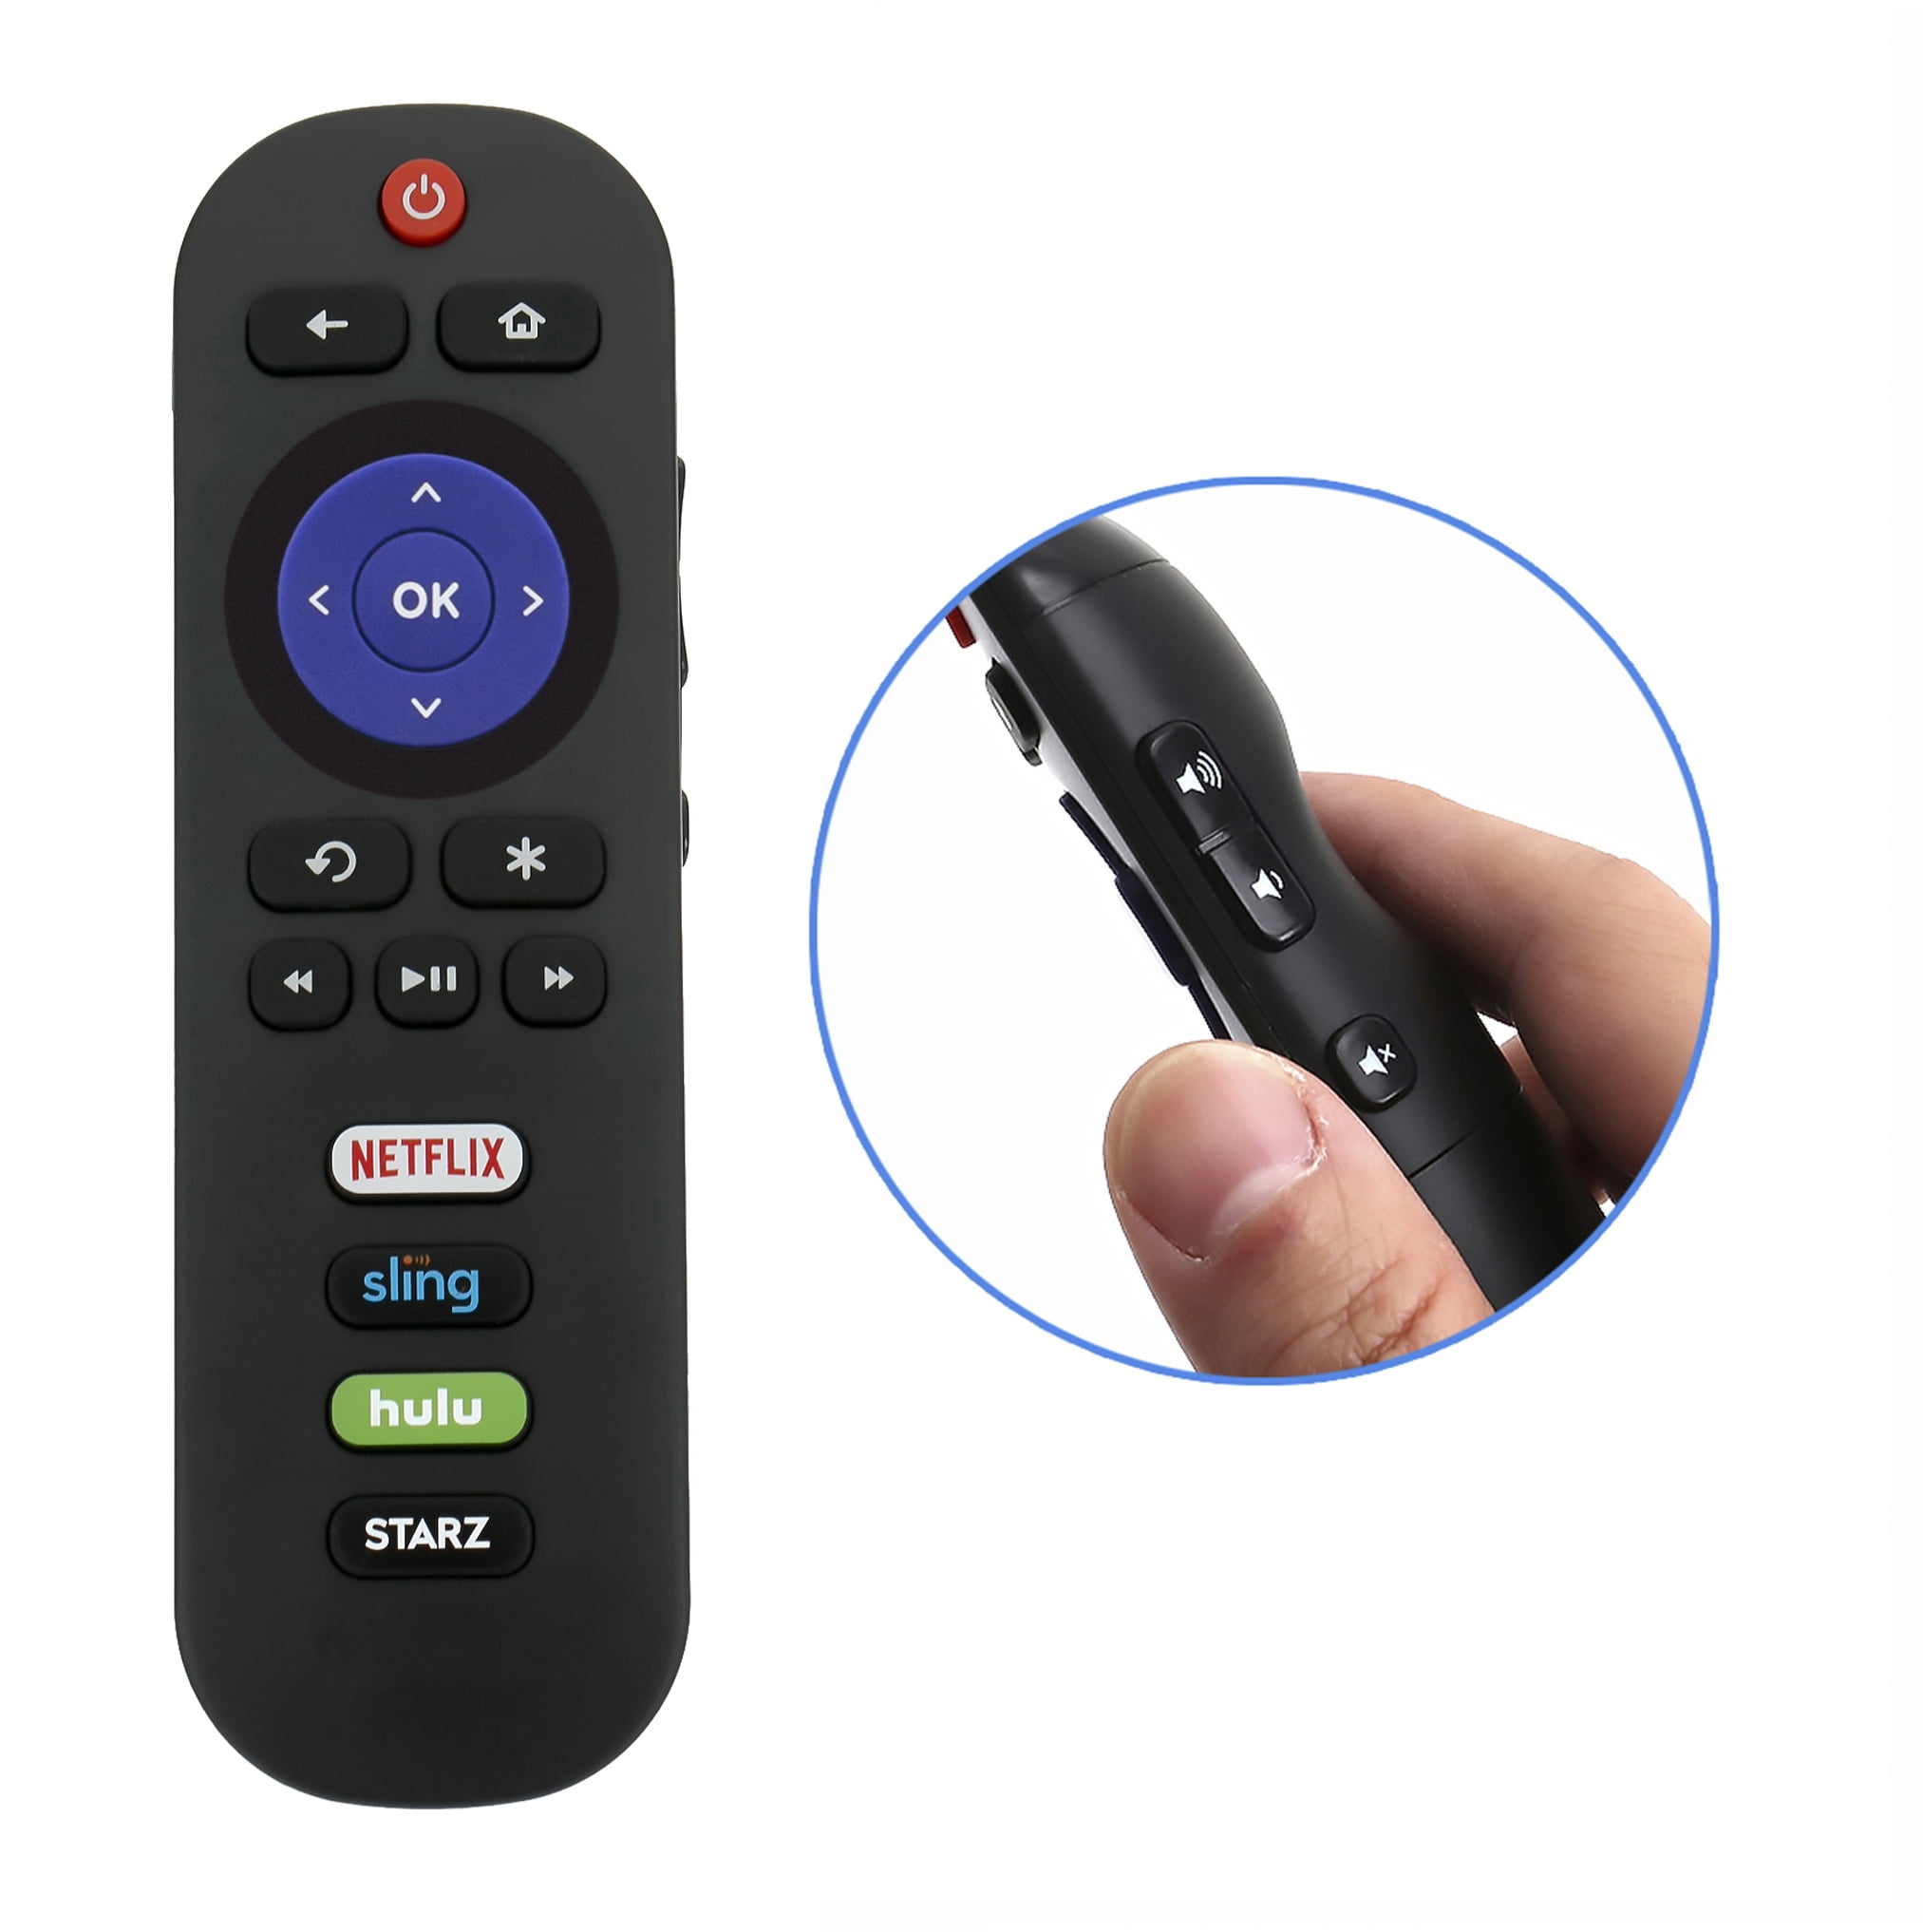 Motiexic Remote Control Compatible with TCL Roku 4K TV Remote 32S305 32s325 49S405 49S403 43S303 55S403 32S301 50FS3800 32S3750 32S3800 32S4610R 32S3850A 55p605 32S3700 43FP110 55s405 